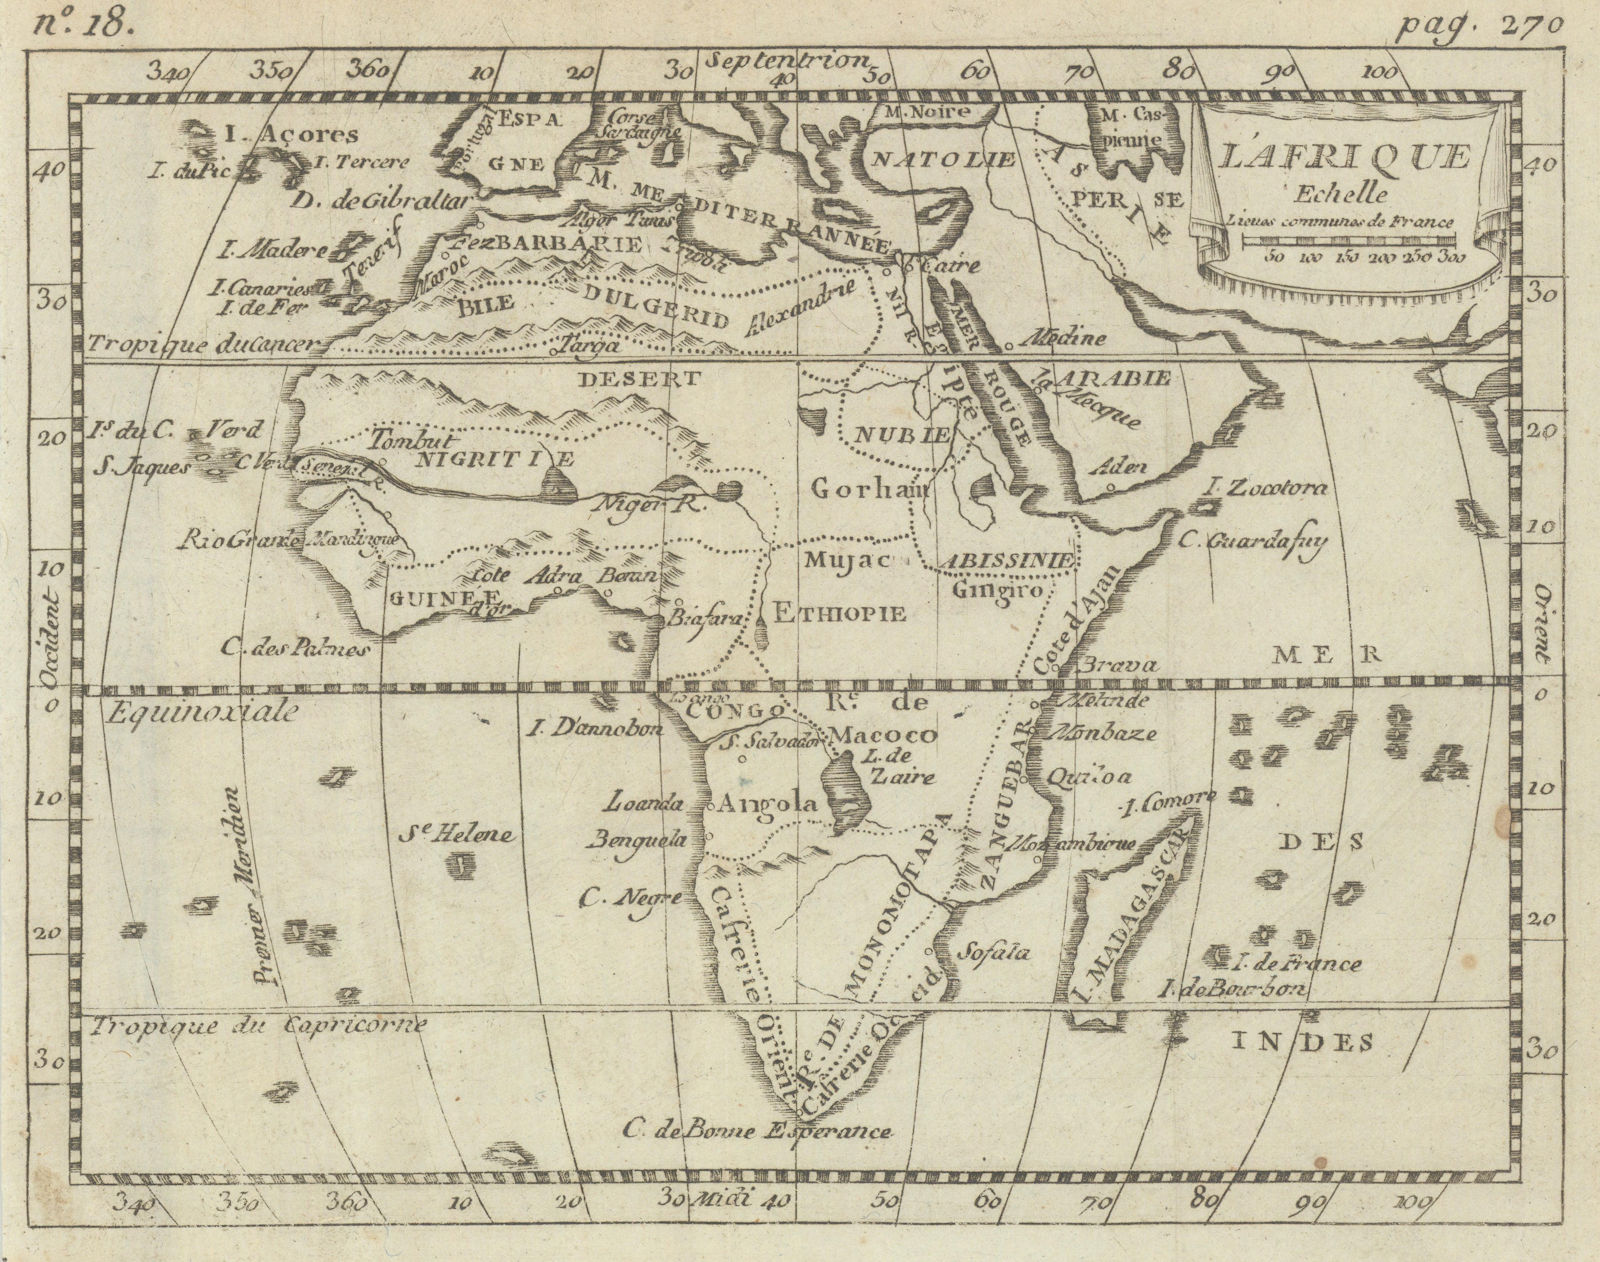 L' Afrique. Pre-Colonial Africa. BUFFIER. Niger flows west c1818 old map